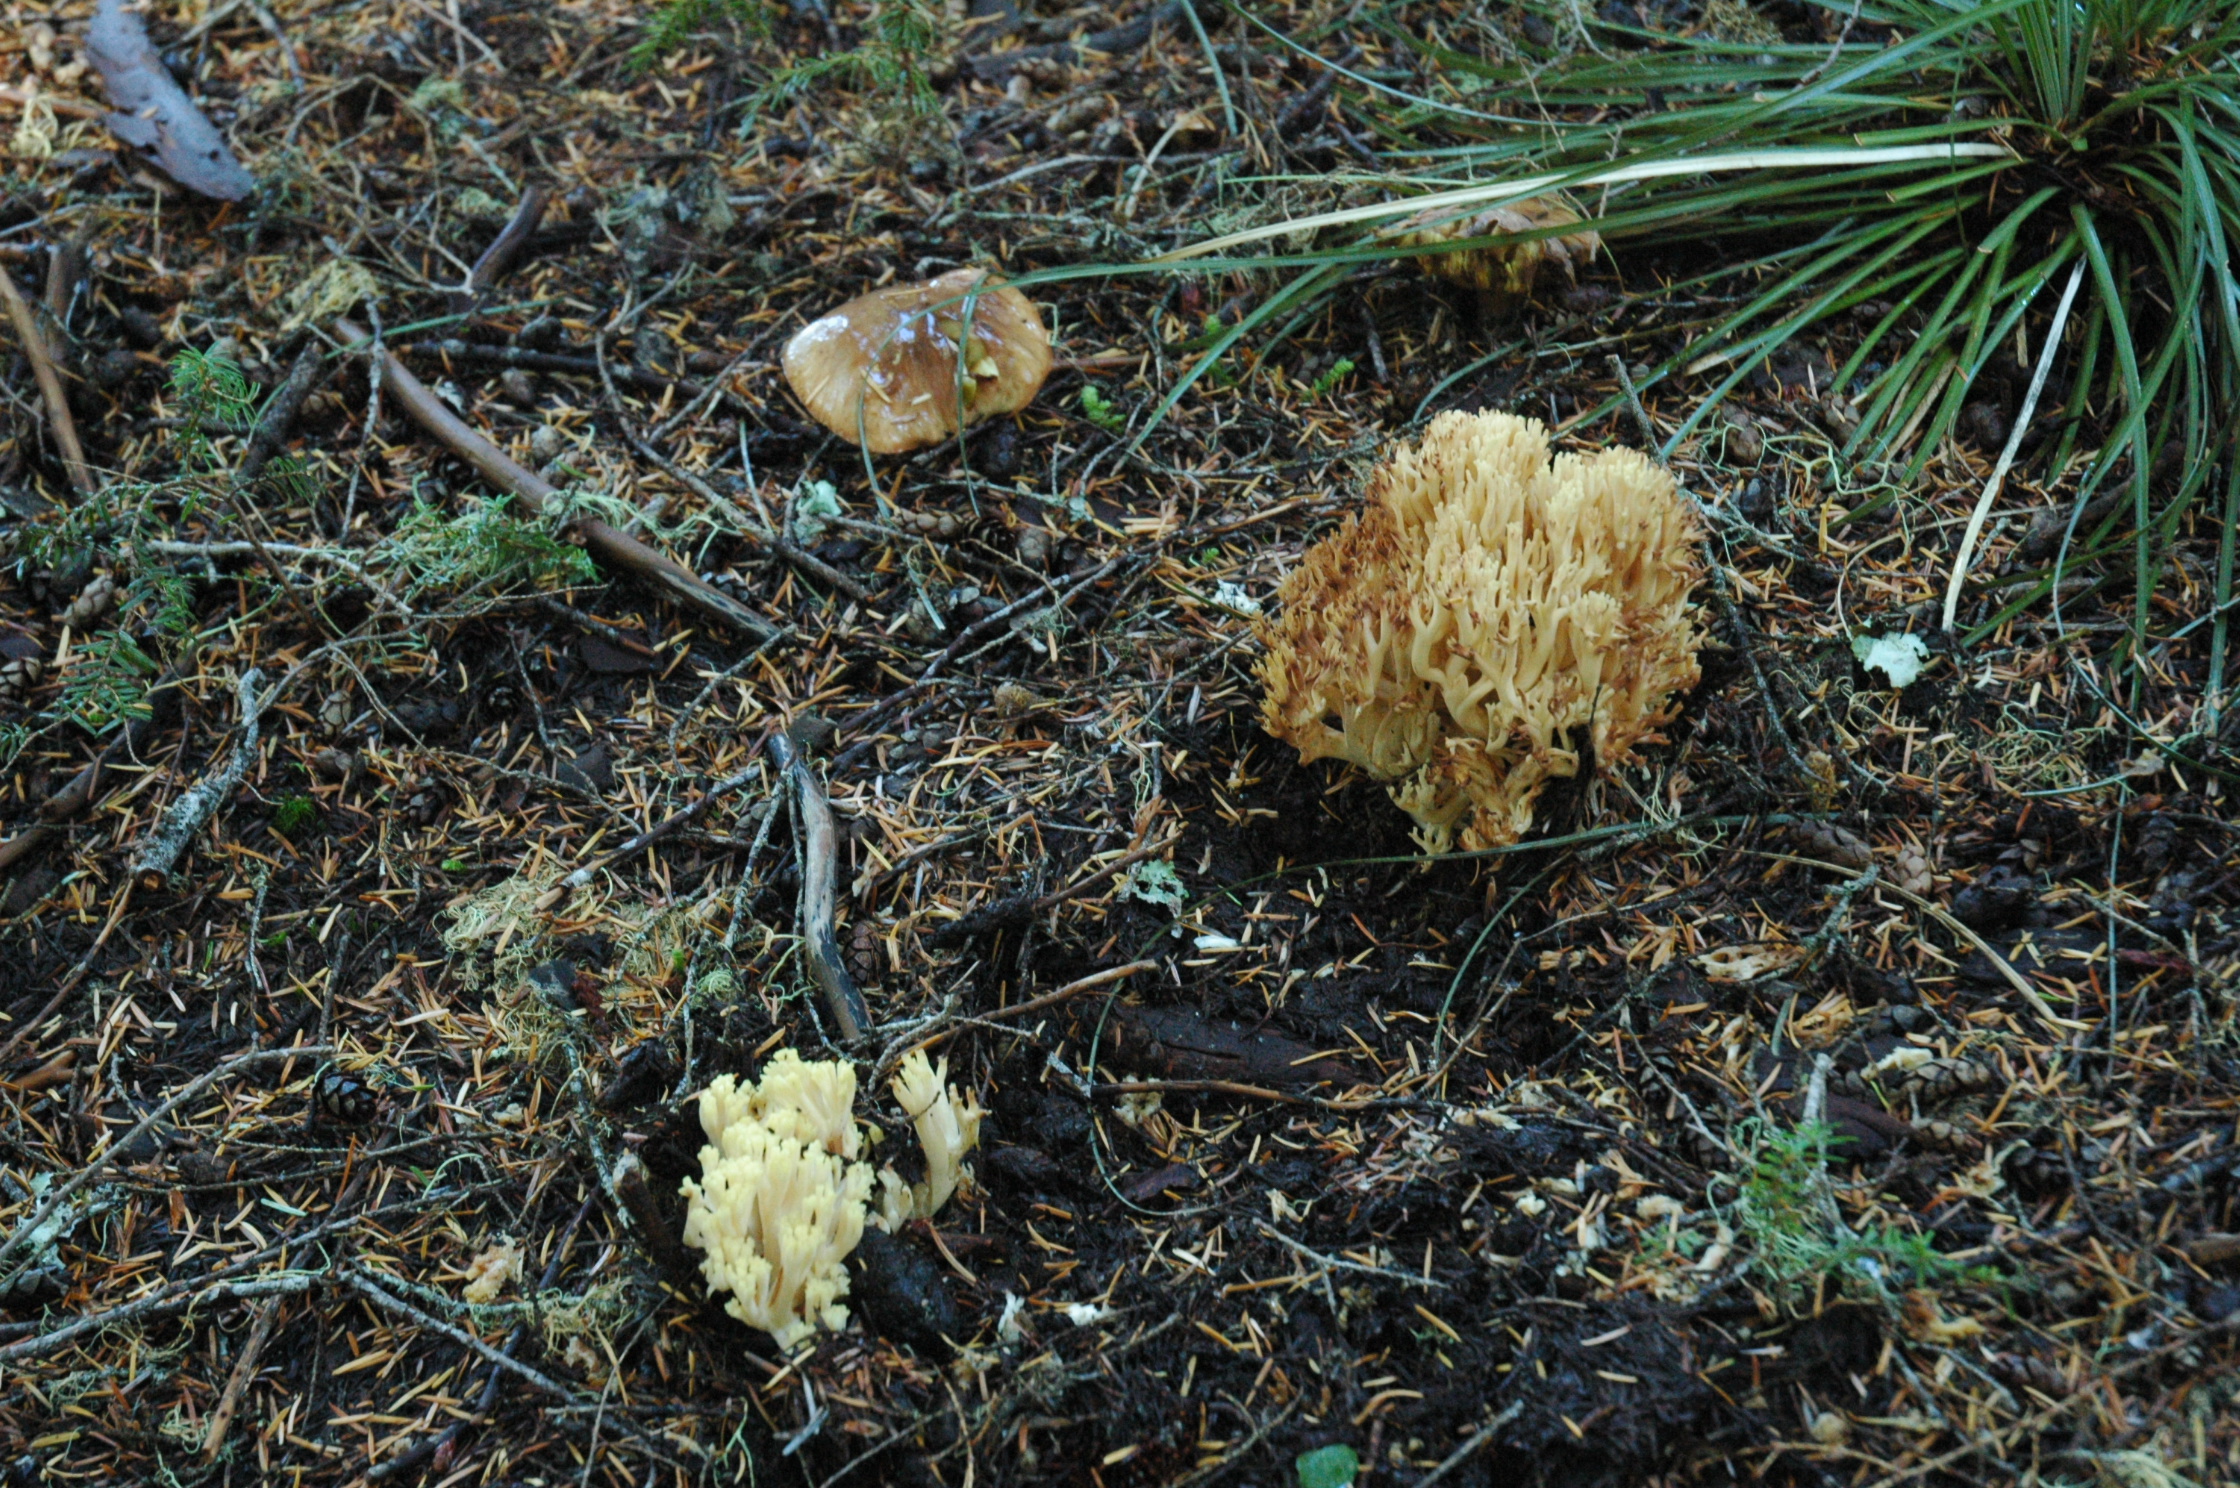 A variety of mushrooms growing on the forest floor in addition to some dark green bear grass within the Hilynx Timber Sale